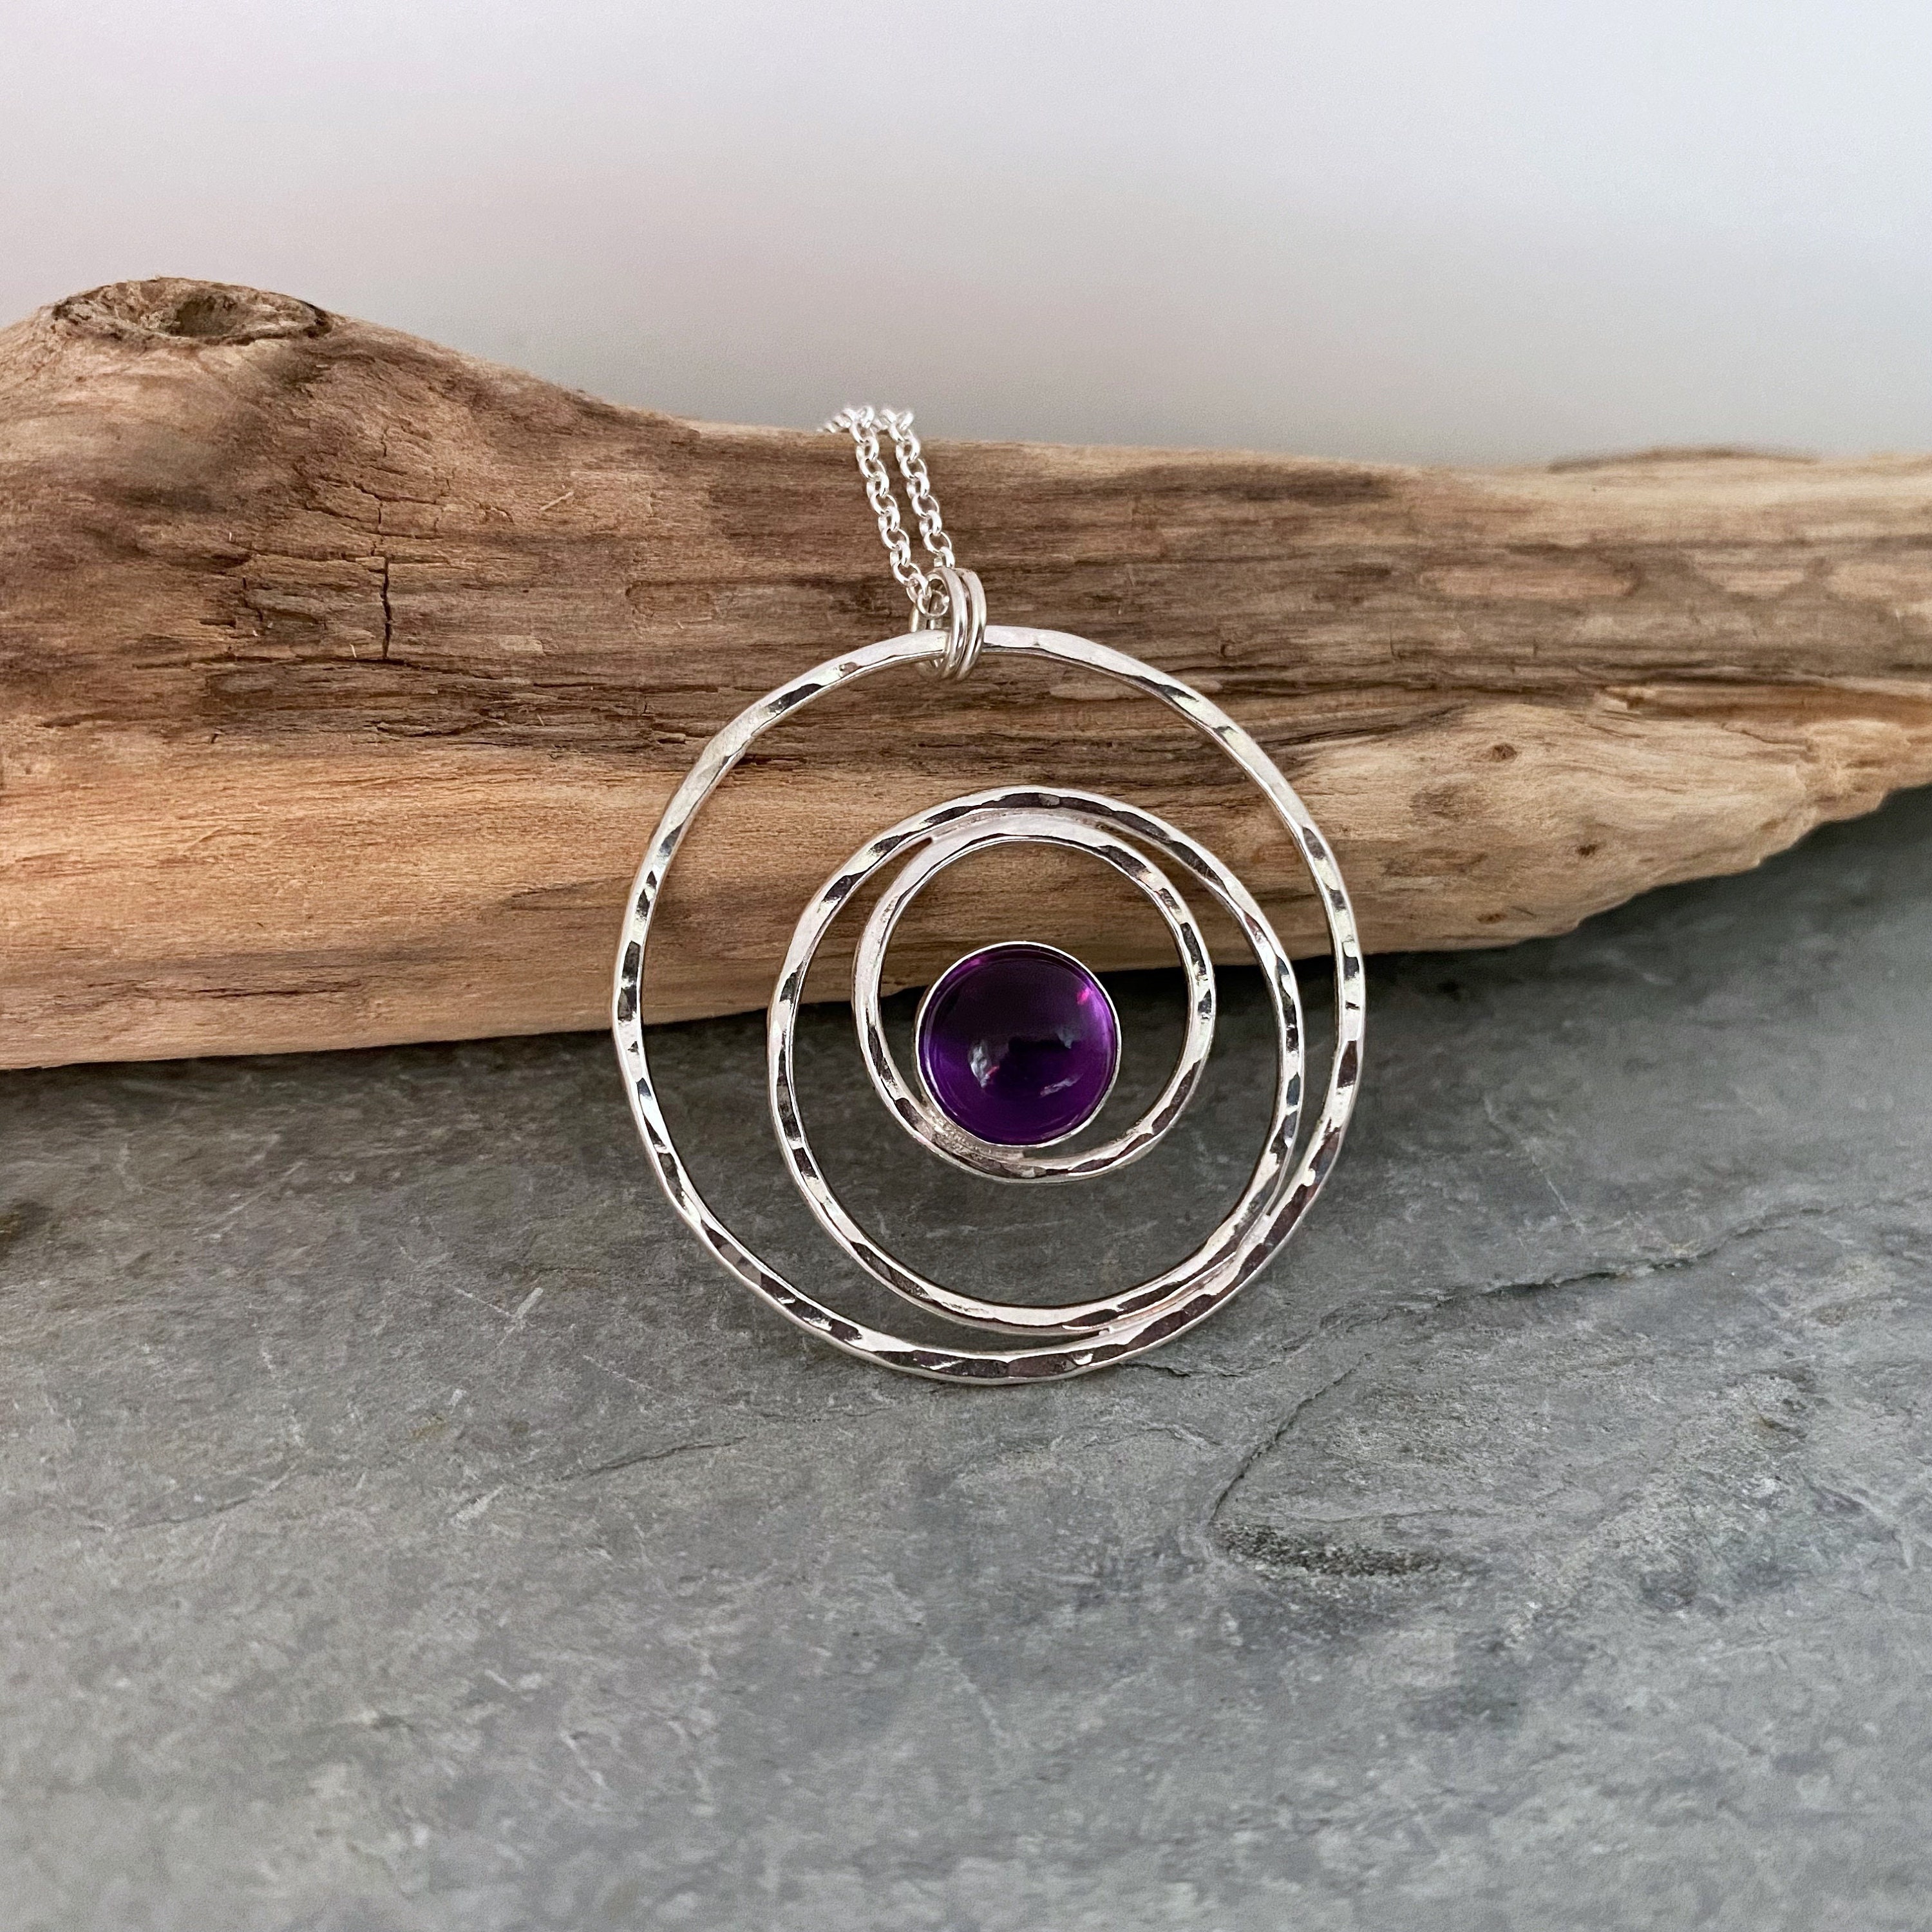 Amethyst Necklace, Silver Circles Pendant With Gemstone, Made From Sterling Silver Rings On A Chain